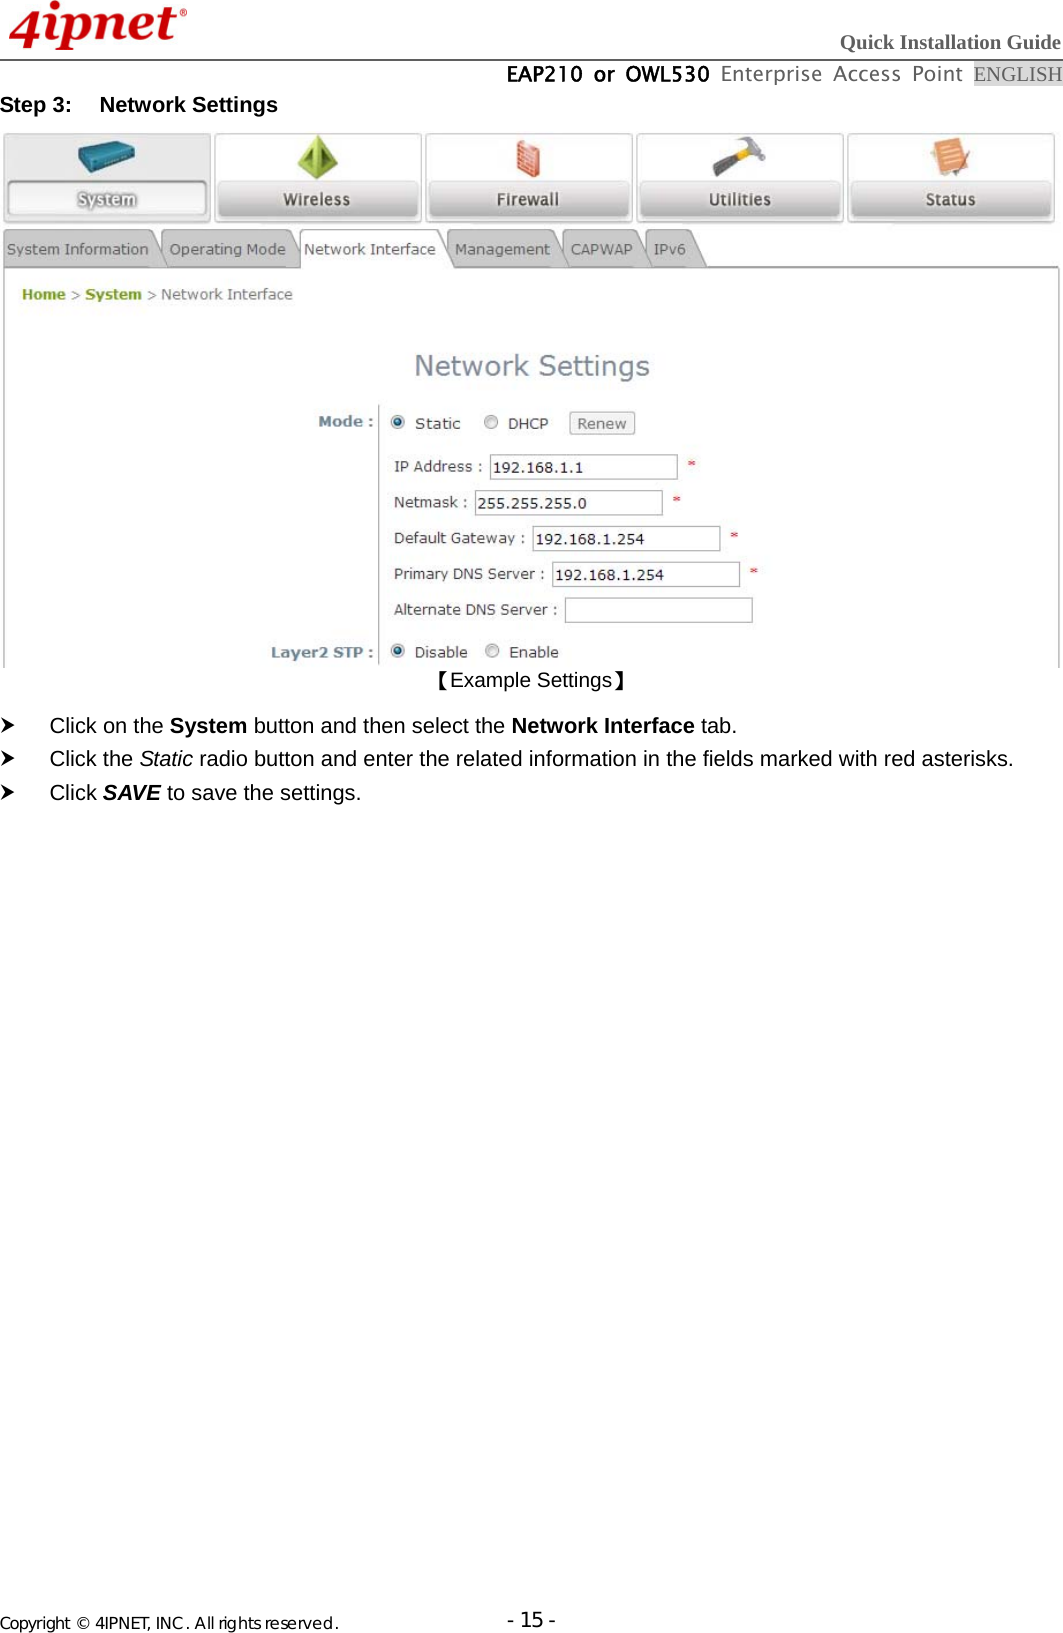  Quick Installation Guide  EAP210 or OWL530 Enterprise Access Point ENGLISH Copyright © 4IPNET, INC. All rights reserved.                       - 15 -Step 3:  Network Settings  【Example Settings】   Click on the System button and then select the Network Interface tab.  Click the Static radio button and enter the related information in the fields marked with red asterisks.  Click SAVE to save the settings.  